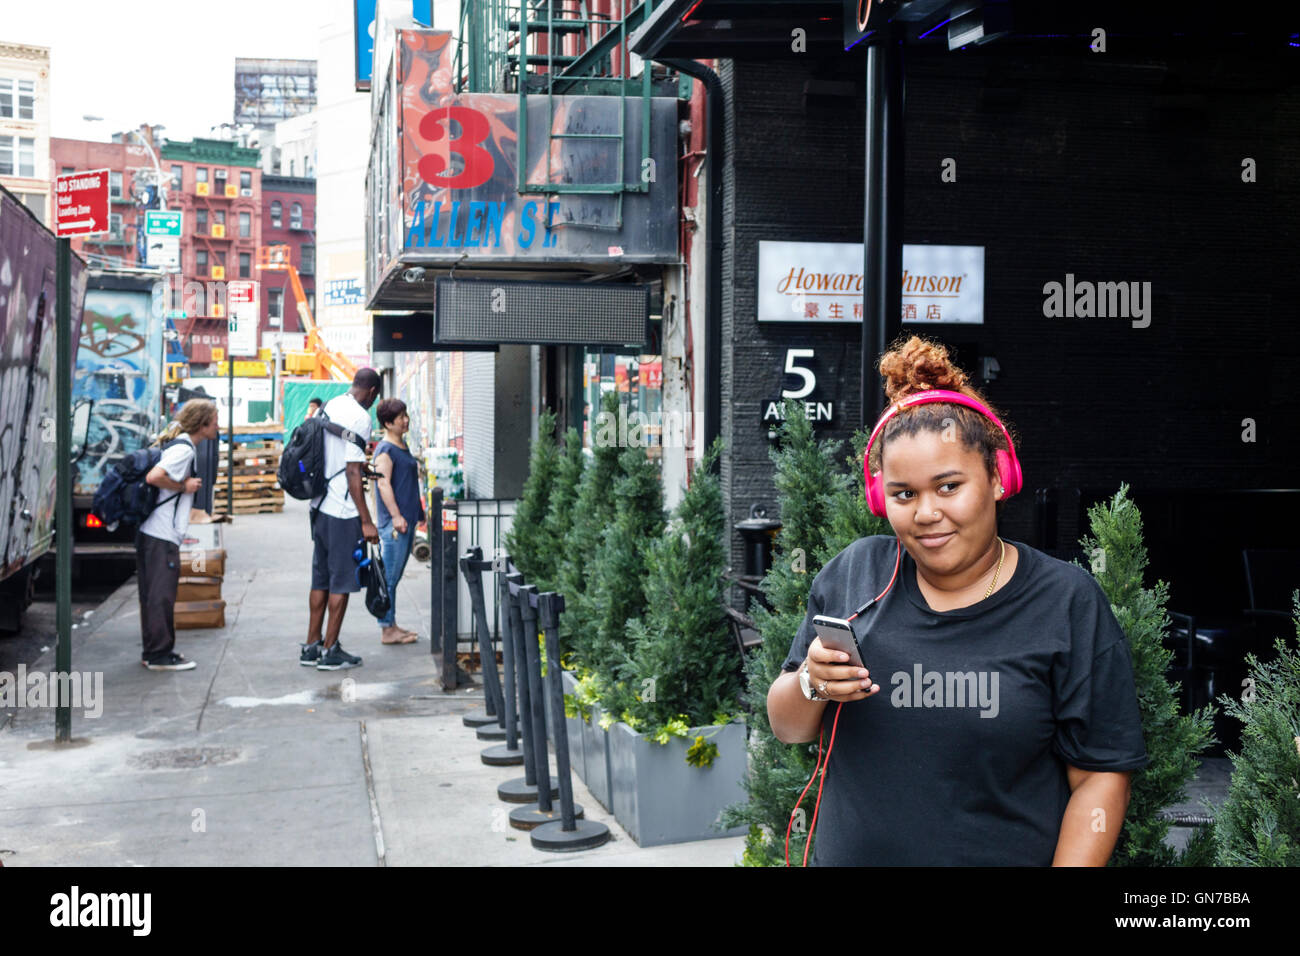 New York City,NY NYC,Lower Manhattan,Allen Street,sidewalk,Black Blacks African Africans ethnic minority,adult adults,woman women female lady,young ad Stock Photo